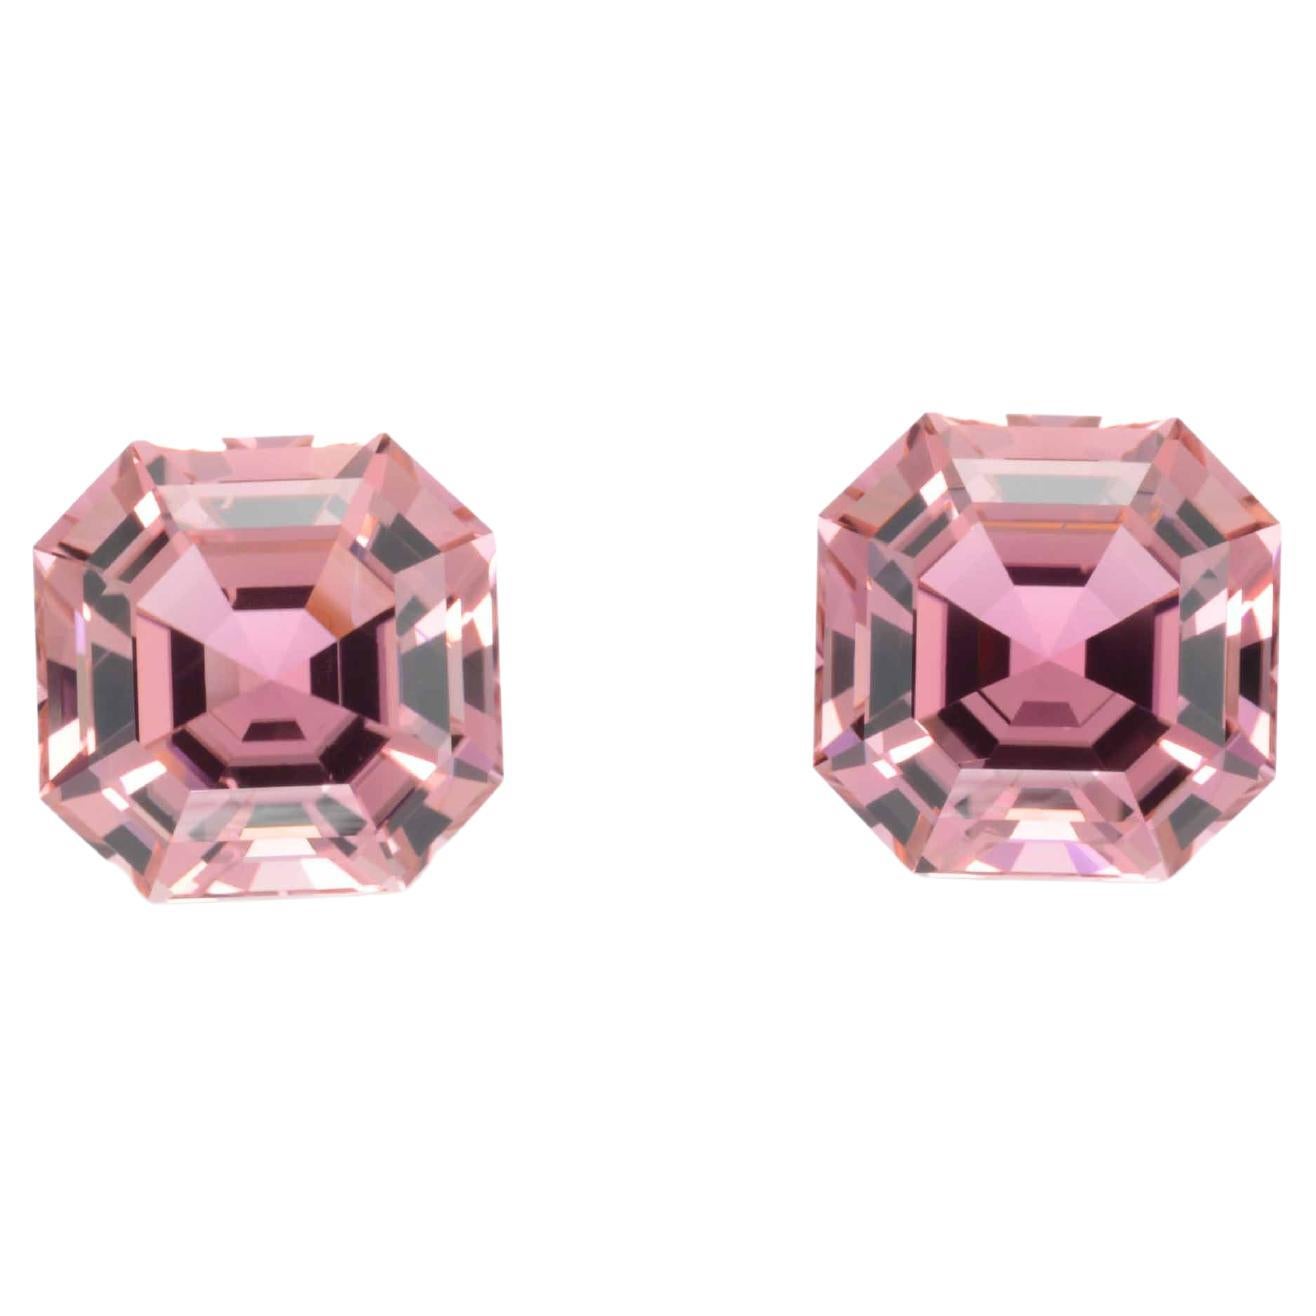 Exclusive pair of 11.01 carats total, 